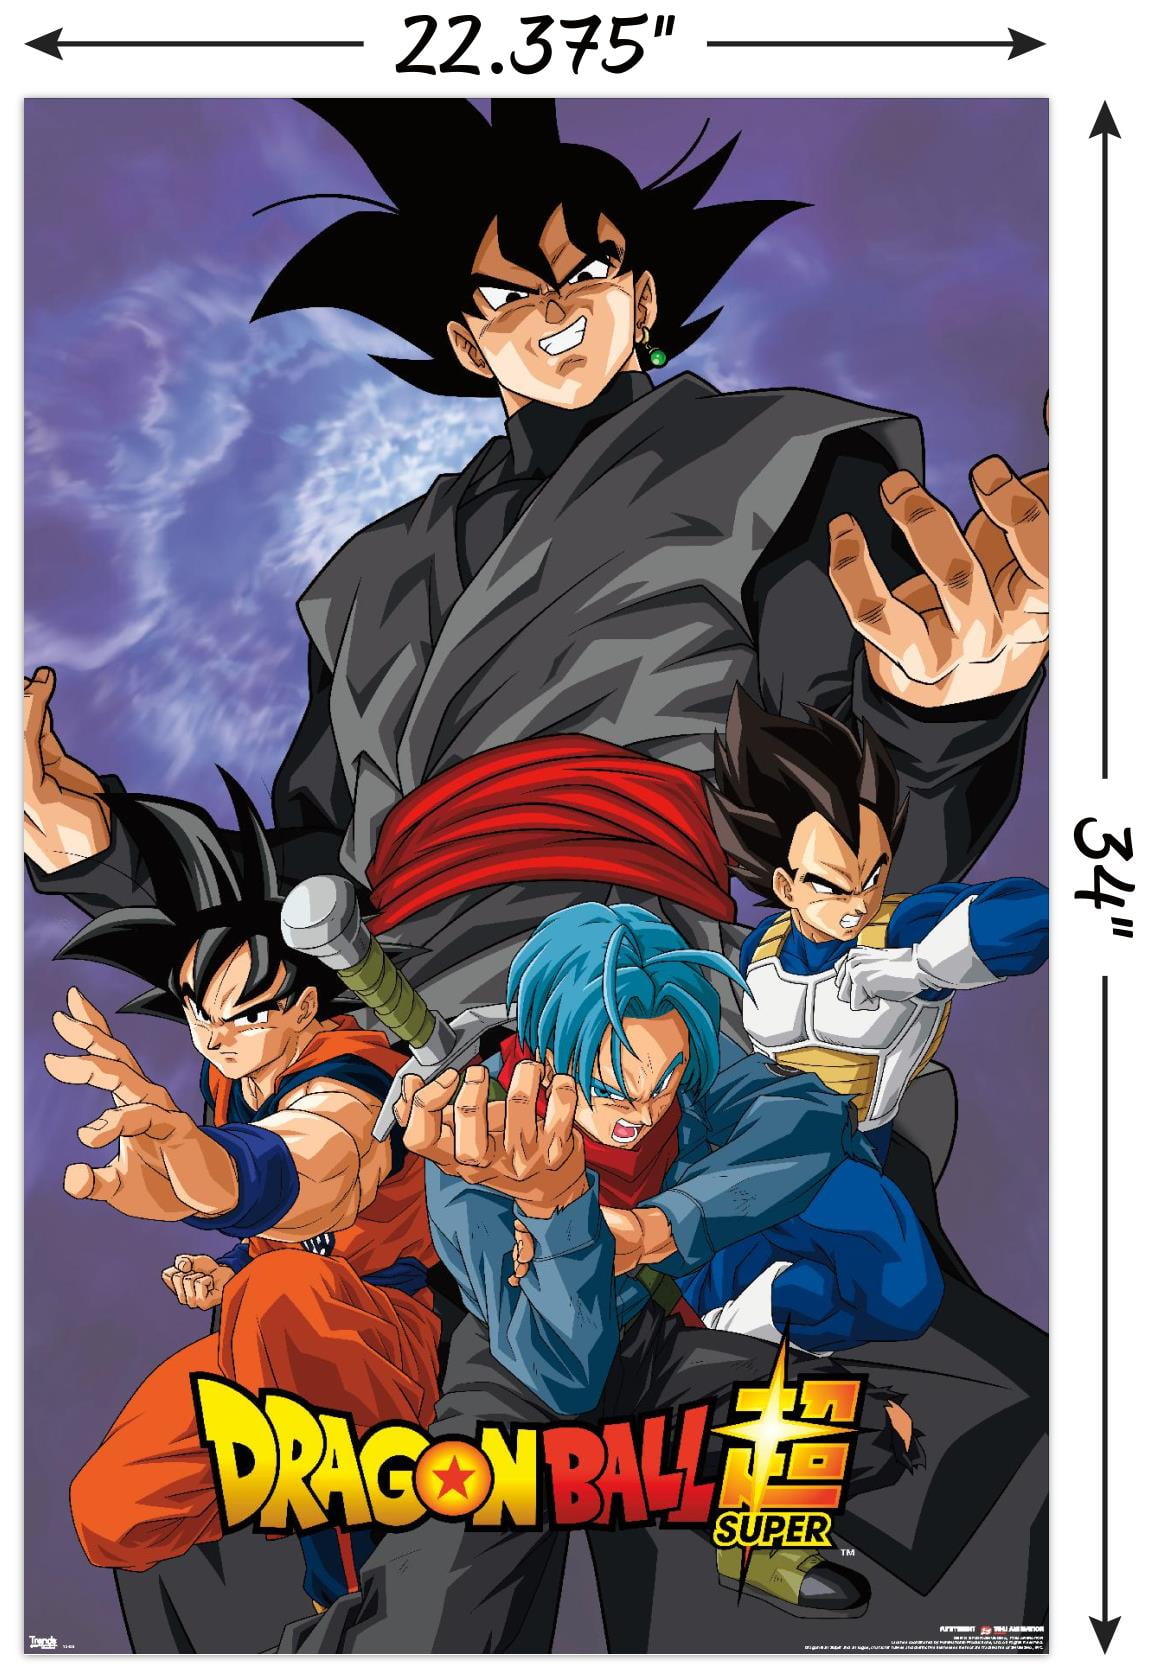 Manga-Mafia.de - Dragon Ball Super: Broly - Group - 91,5x61 Poster - All  products - Your Anime and Manga Online Shop for Manga, Merchandise and more.